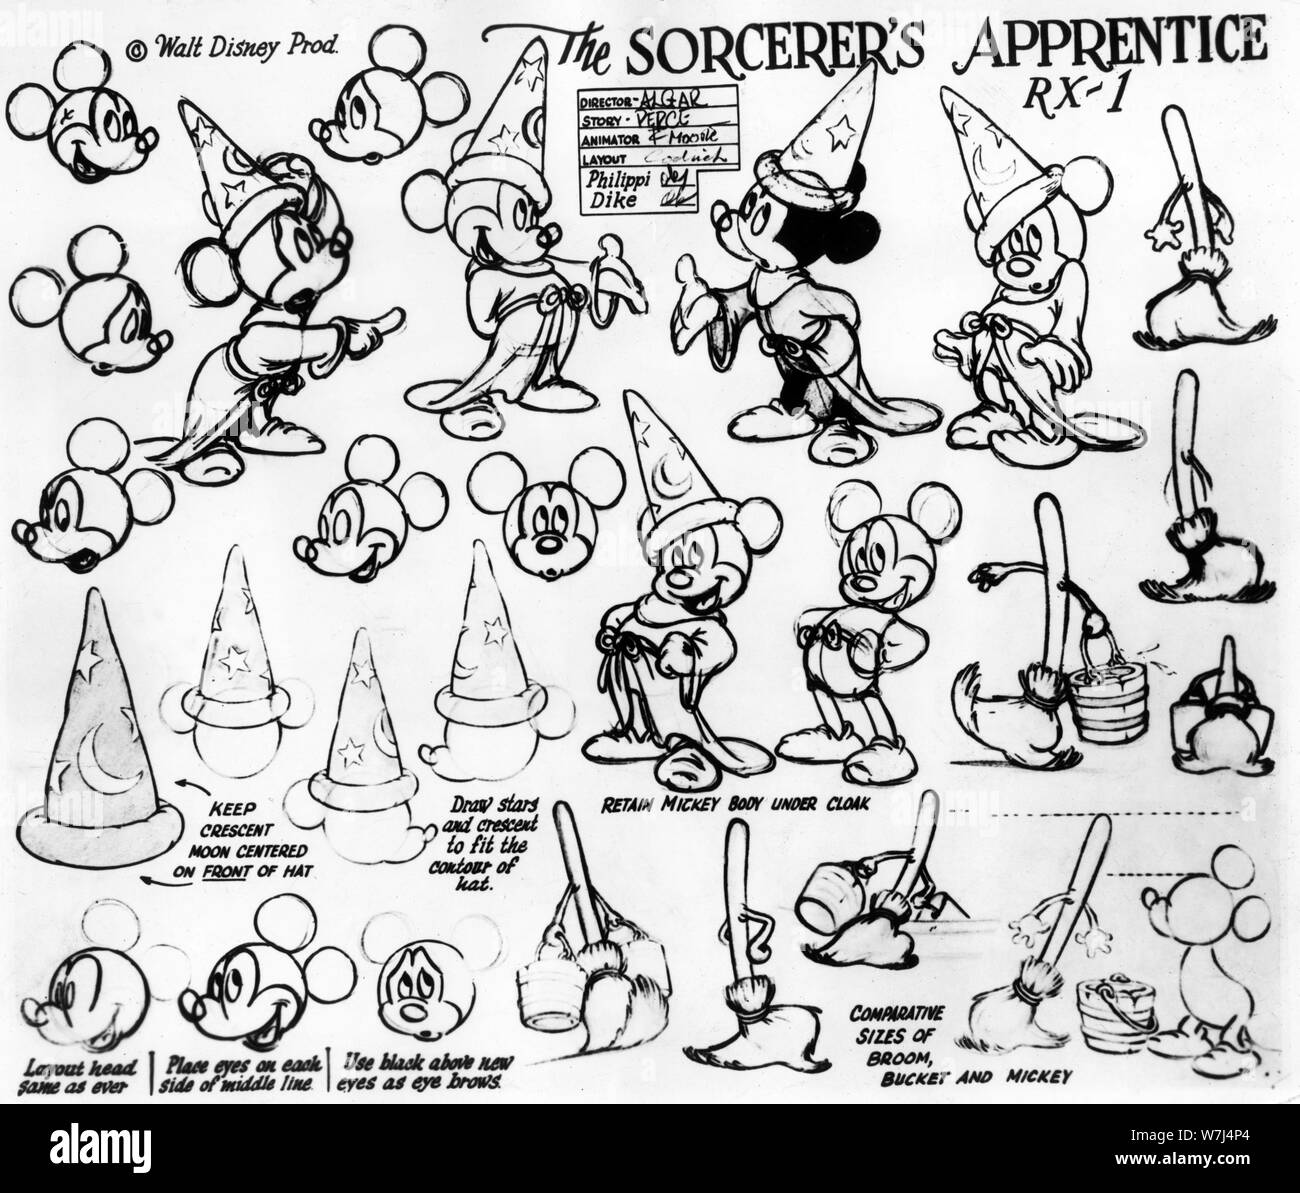 WALT DISNEY FANTASIA 1940 character model sheet for MICKEY MOUSE in THE SORCERER'S APPRENTICE sequence director James Algar orchestra conducted by Leopold STOKOWSKI Animated Feature Film Walt Disney Productions / RKO Radio Pictures Stock Photo